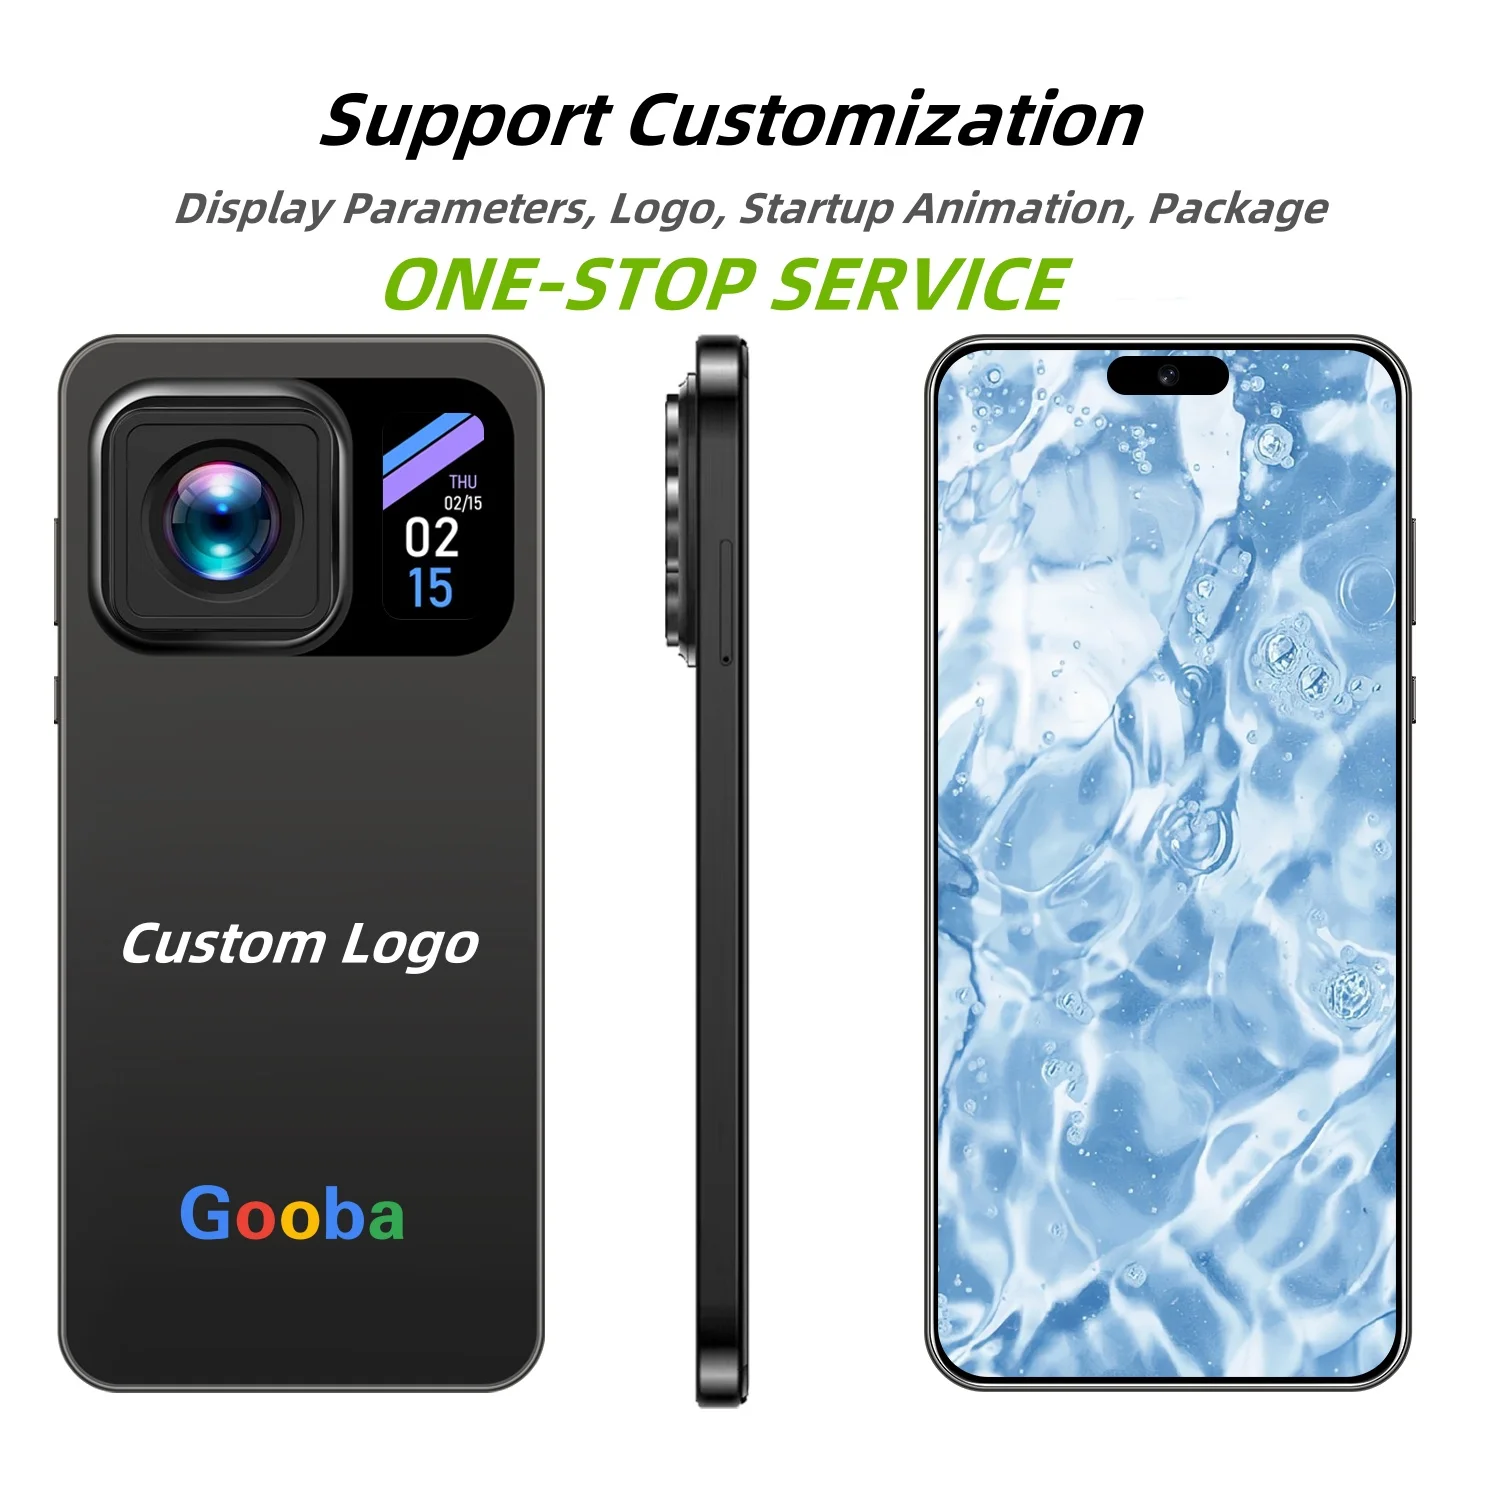 Factory 3G 4G 5G Smartphone support customization of logo, startup animation package customized phone 16GB 32GB 64GB 128GB 256GB